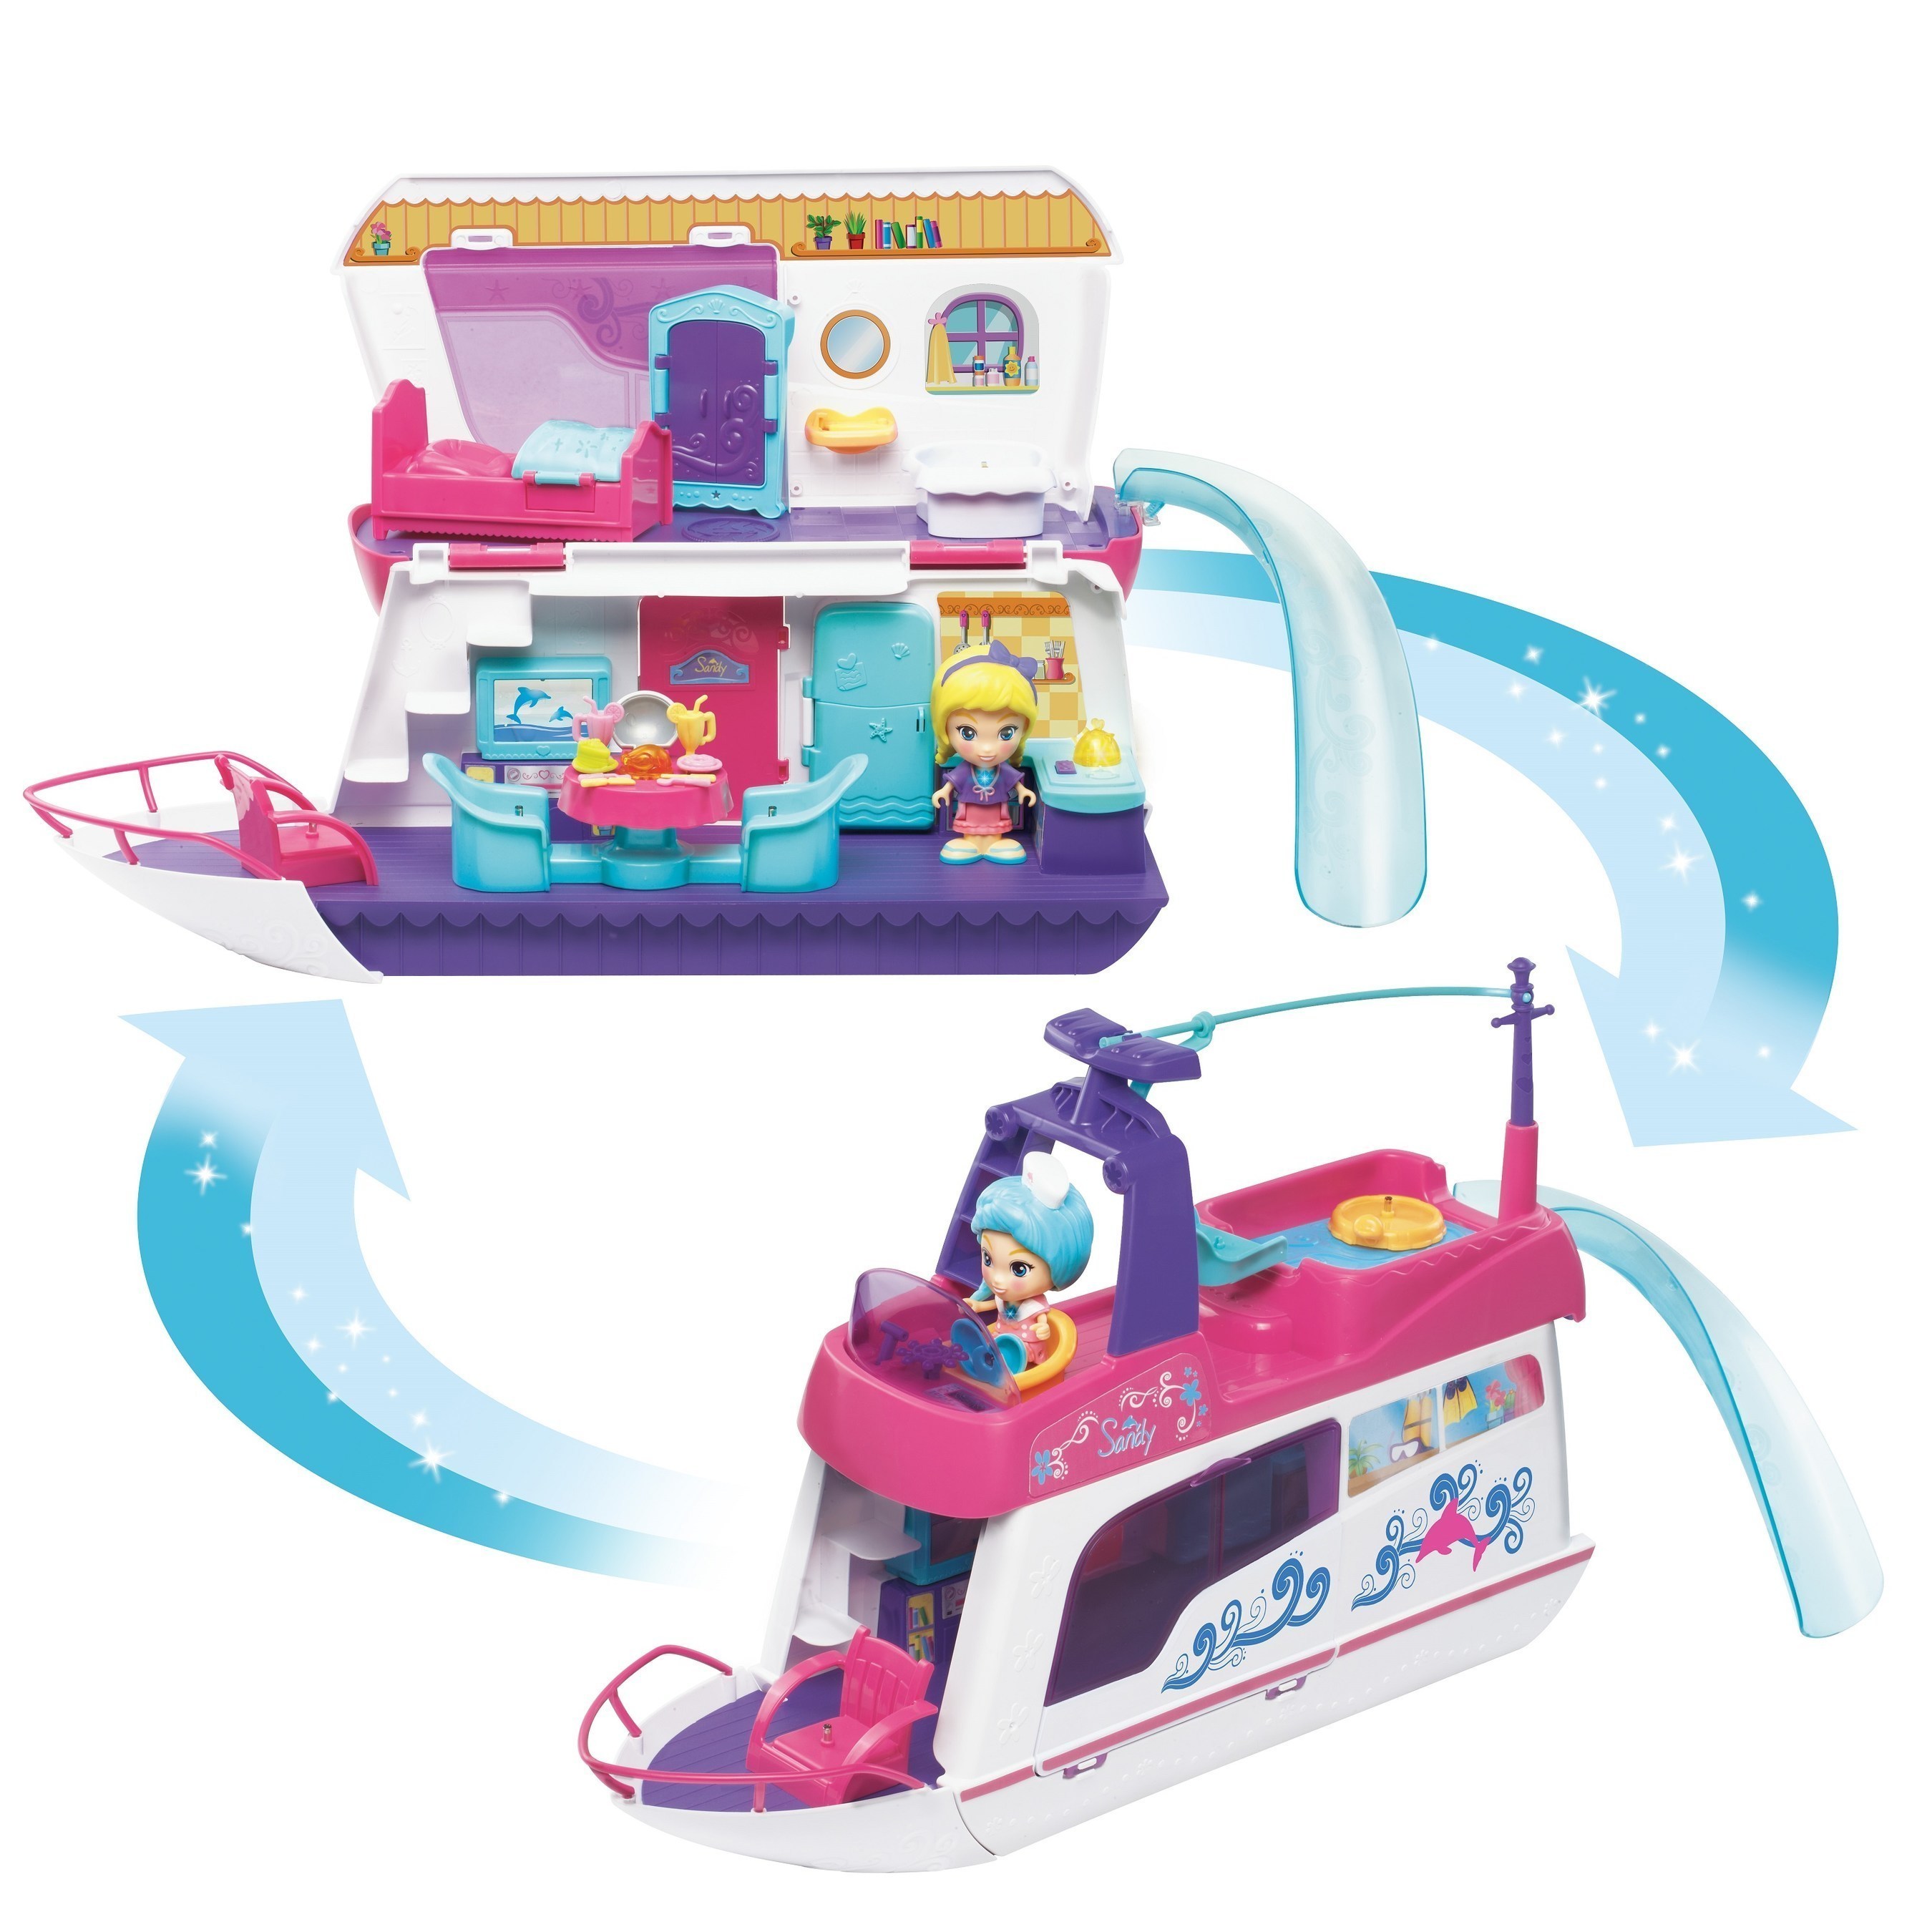 Dreams Your Let Shine!™ Flipsies™ Now VTech® Line by Available Award-Winning